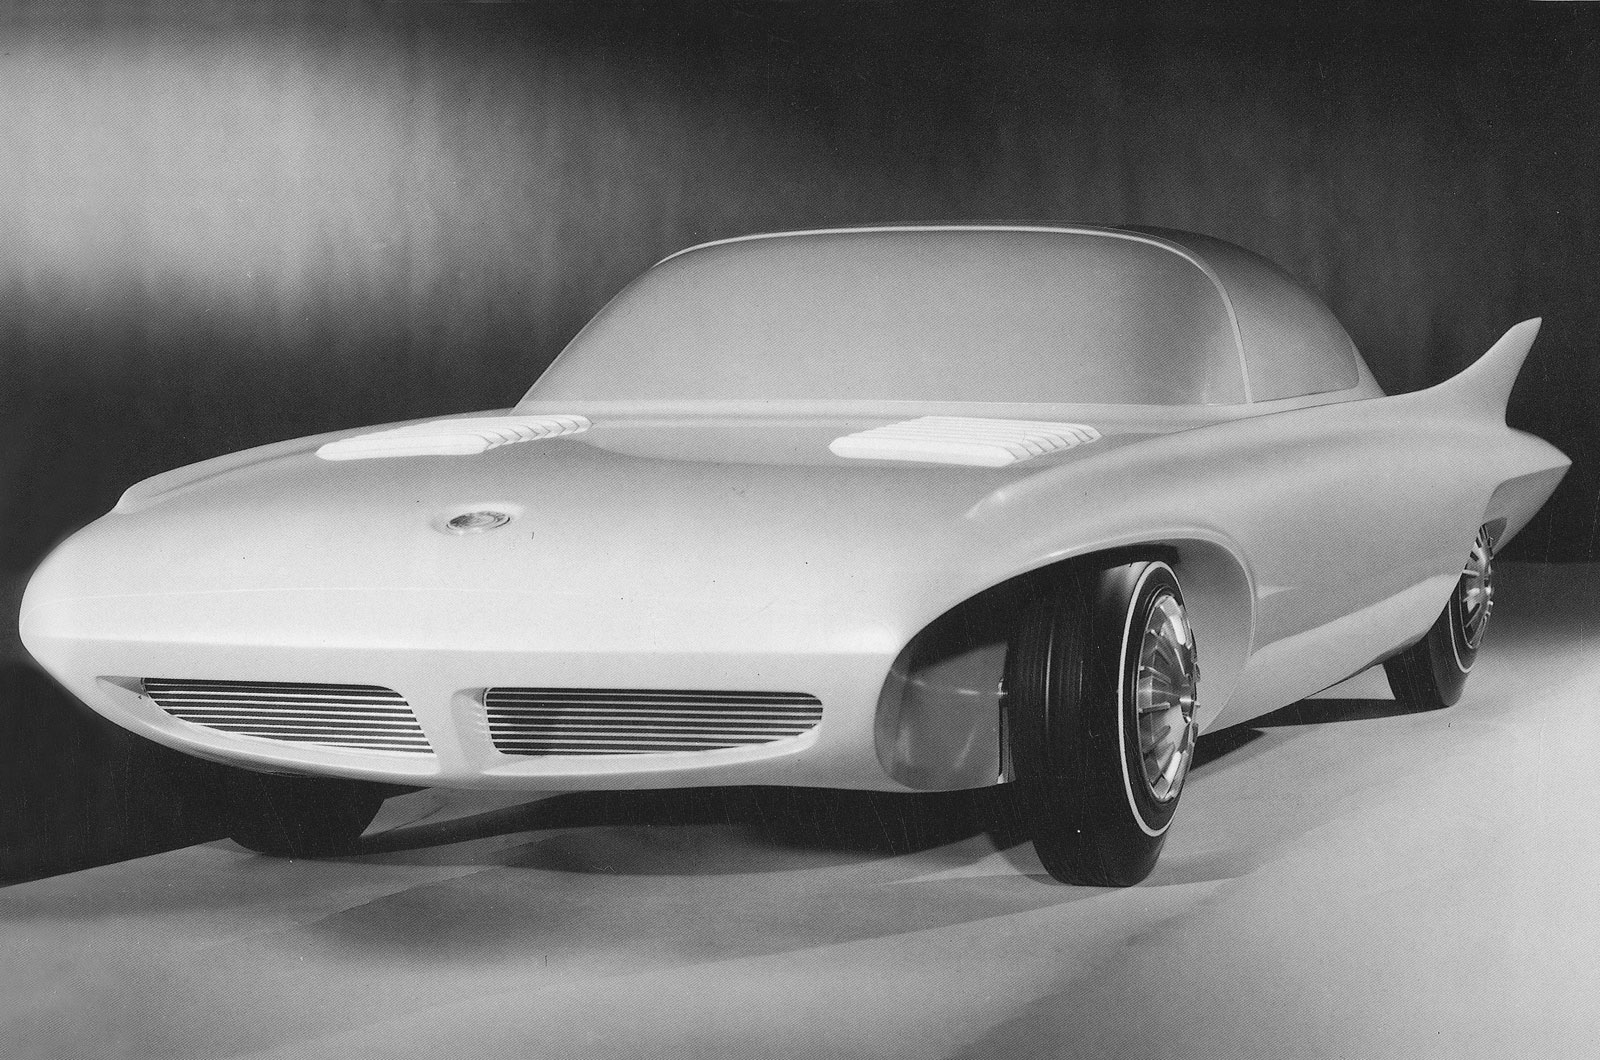 <p>Another one that never got beyond the scale model stage, the Cella from Chrysler looked futuristic enough, but it was the propulsion system that was out of this world. Instead of using a conventional engine, the Cella was powered by an electrochemical system that was supposed to transform hydrogen and oxygen into silent electrical energy to drive lightweight motors fitted to each wheel.</p>